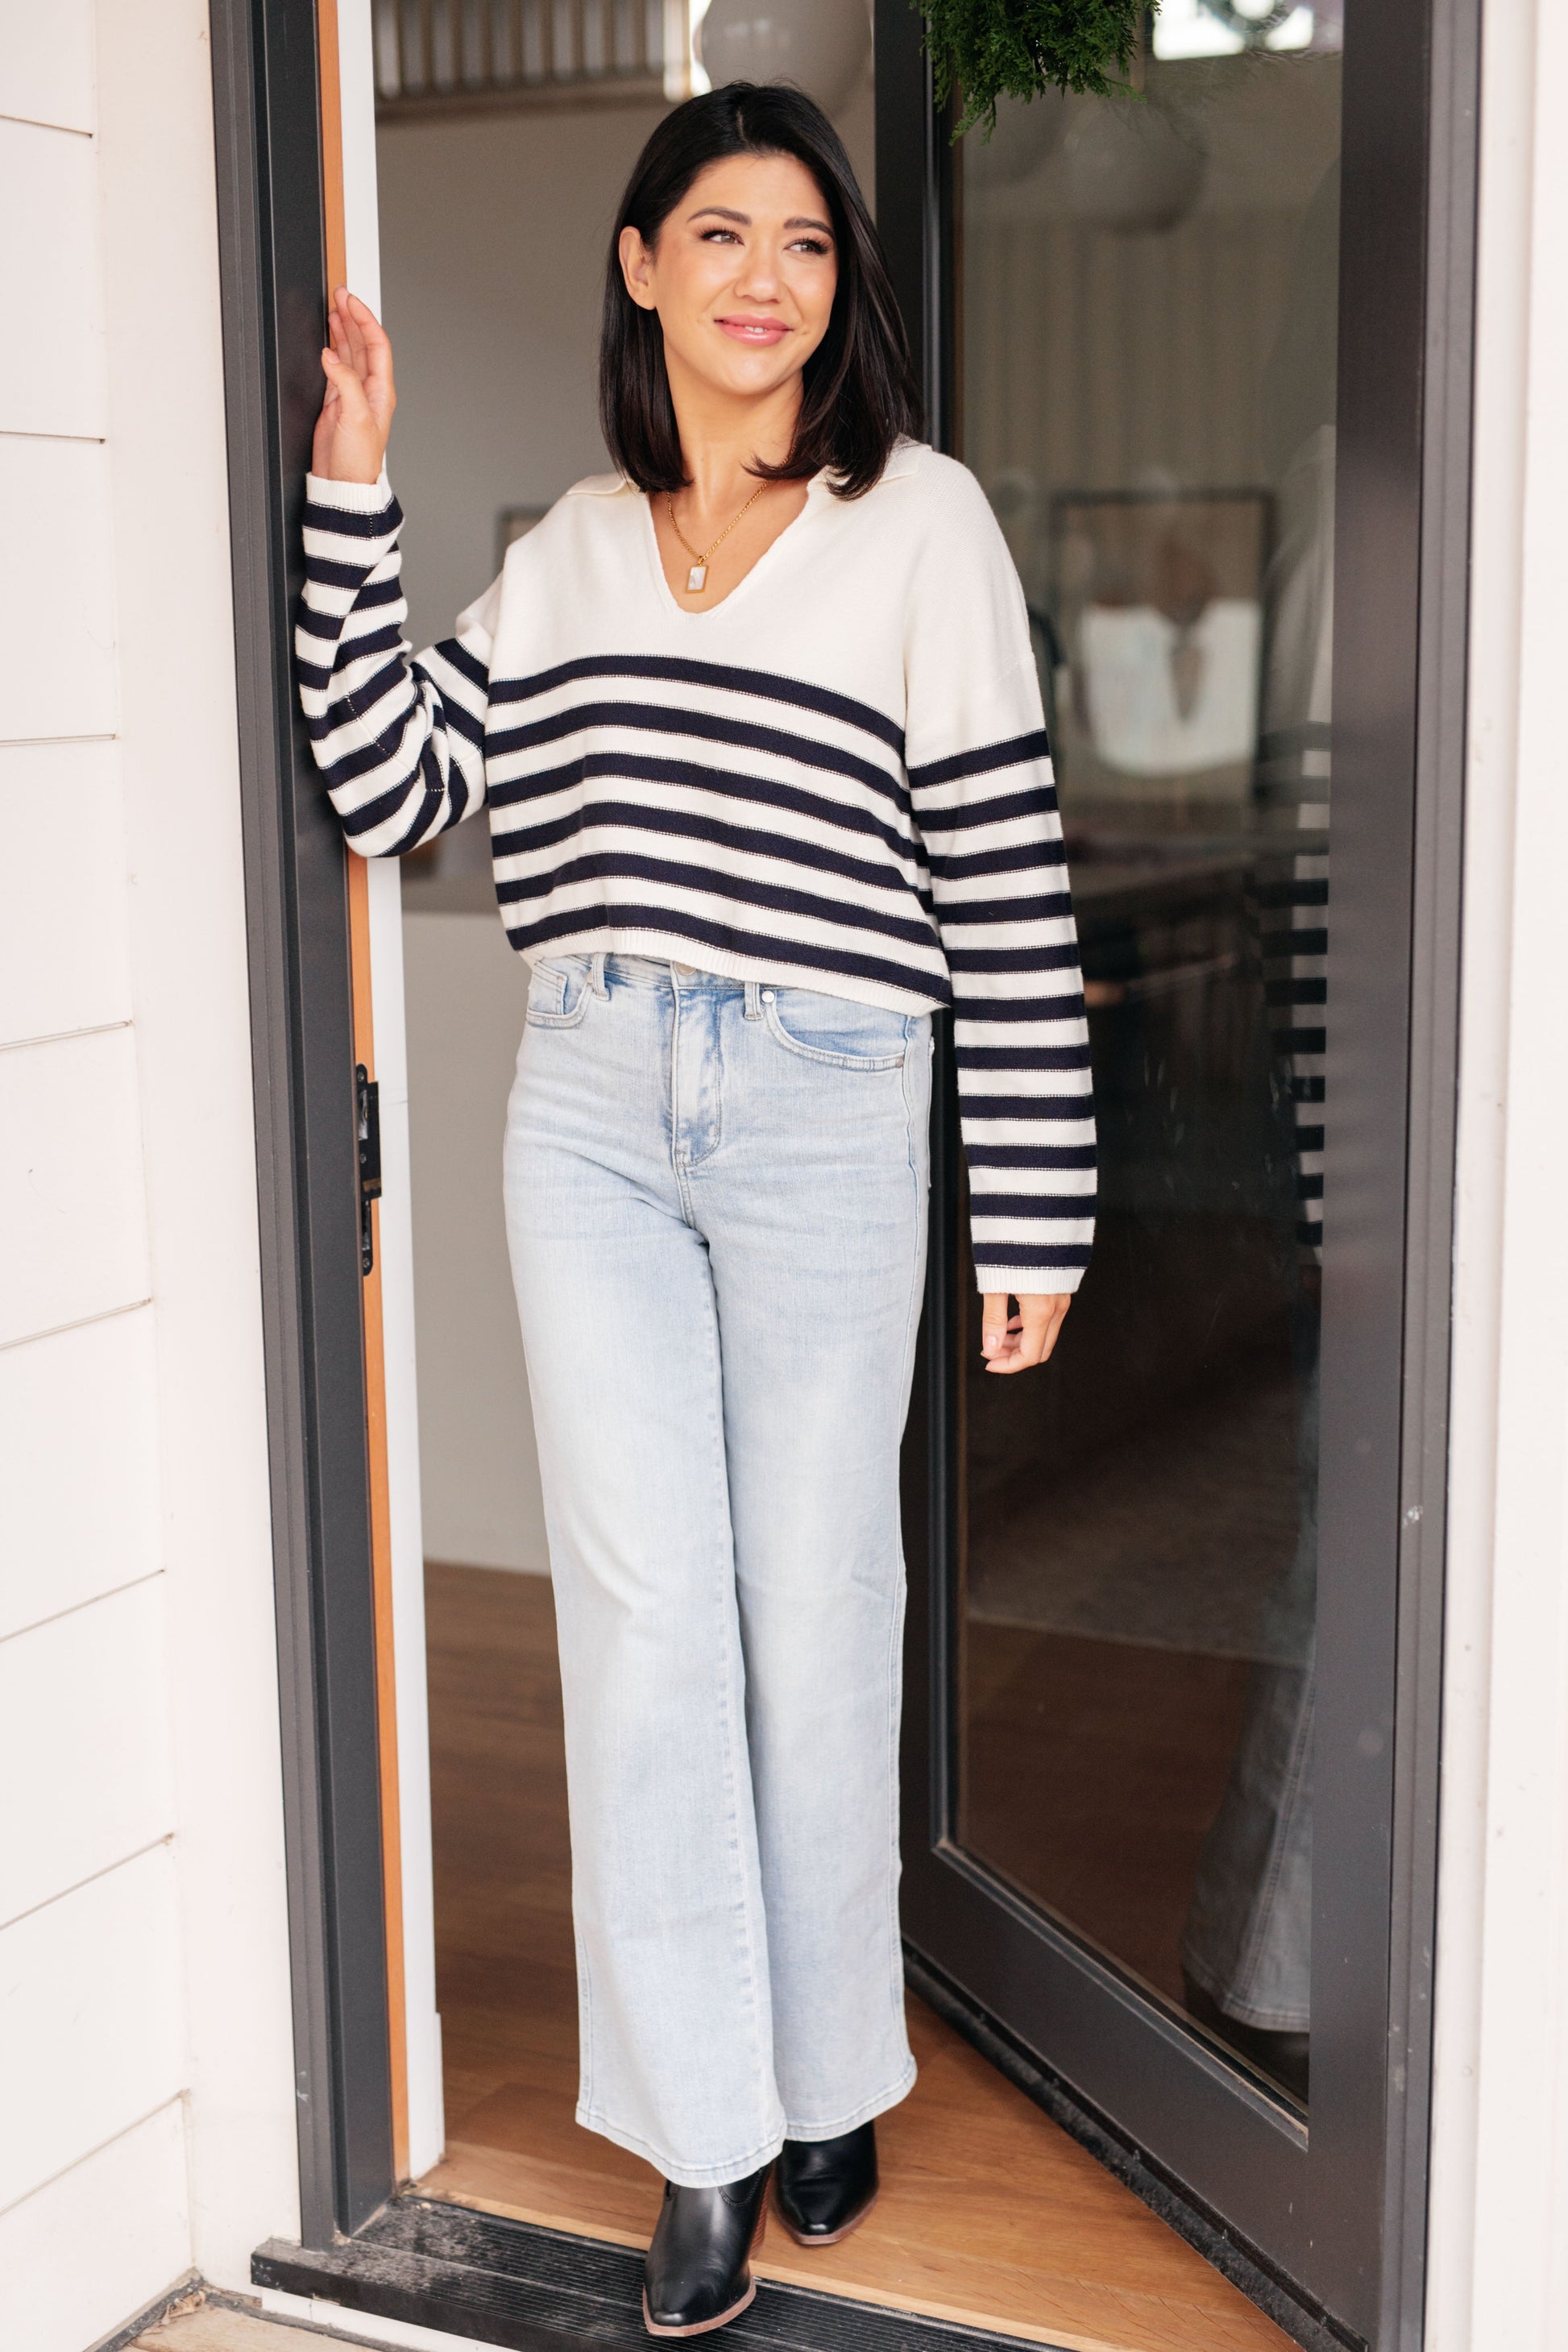 Memorable Moments Striped Sweater in White-Womens-Ave Shops-Happy Campers Boutique, Women's Fashion and More in Plainwell, MI